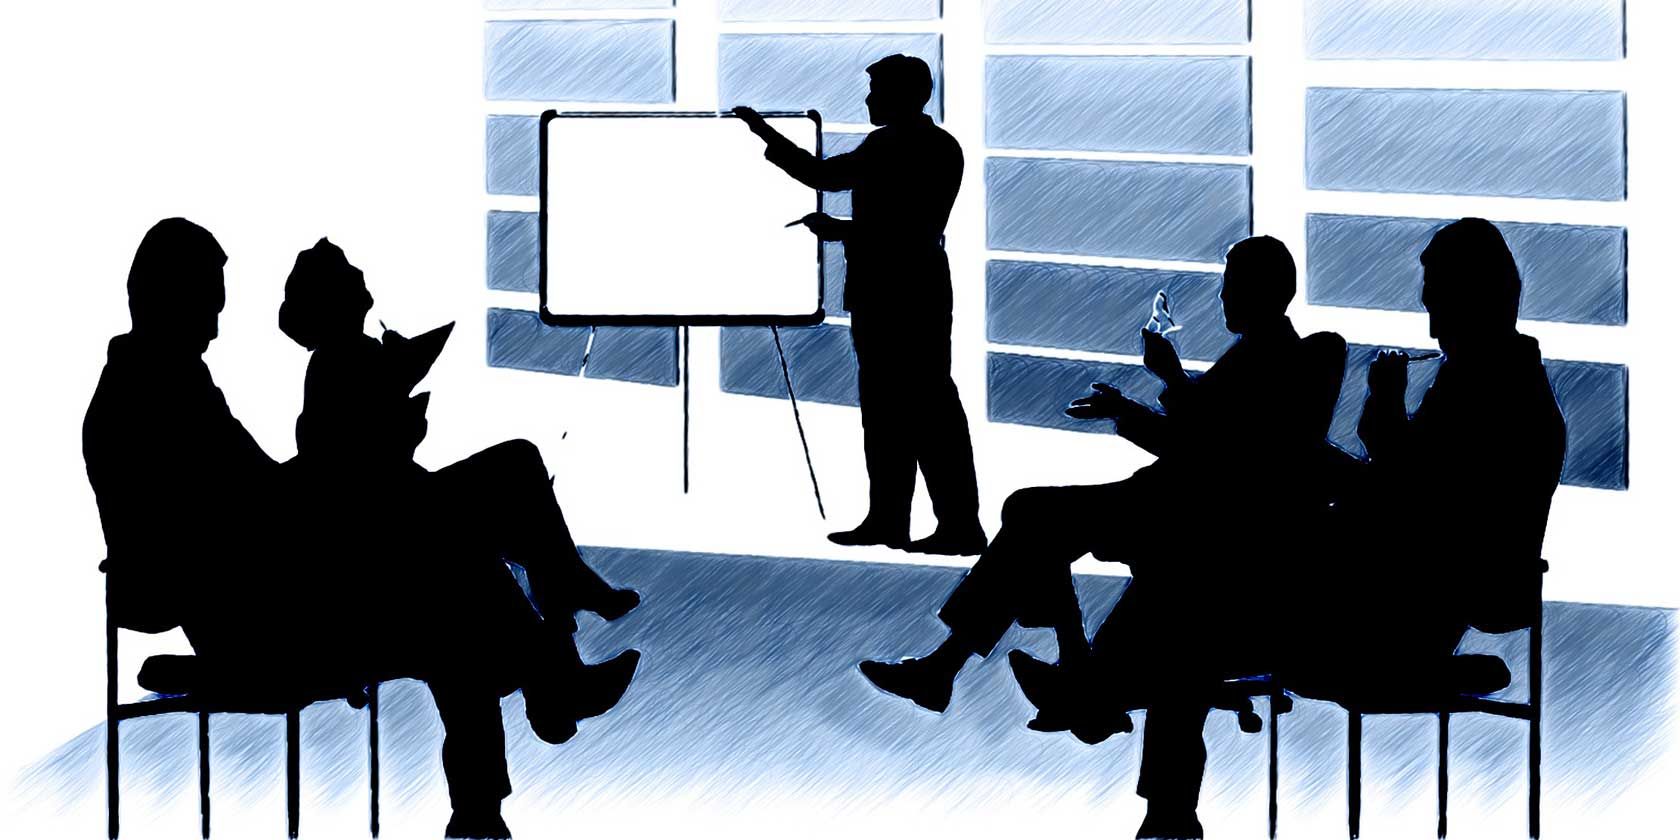 explain the uses of powerpoint as a presentation software